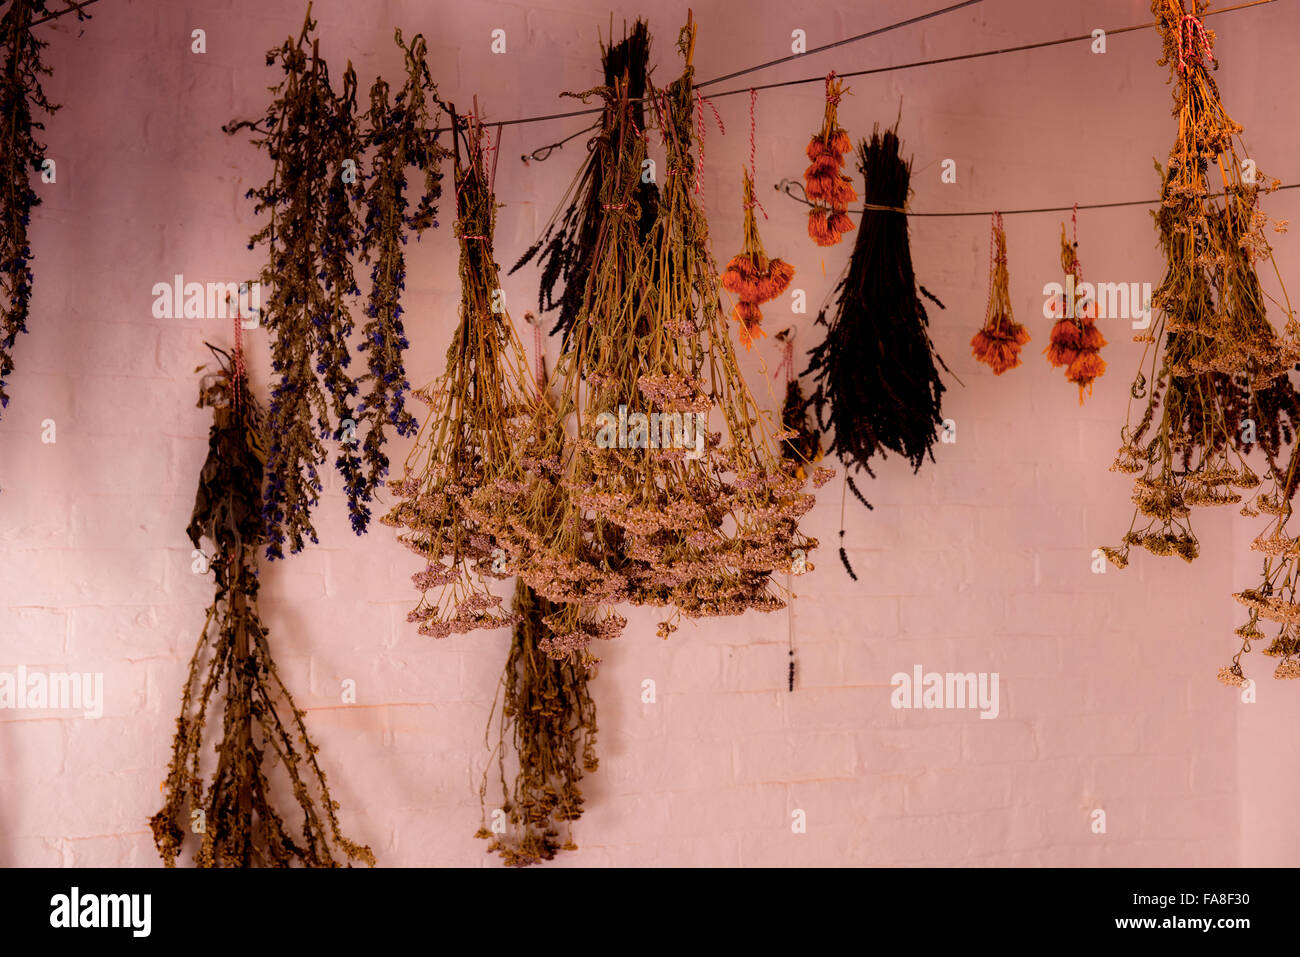 Dried Flowers Hanging Upside Down High Resolution Stock Photography And Images Alamy